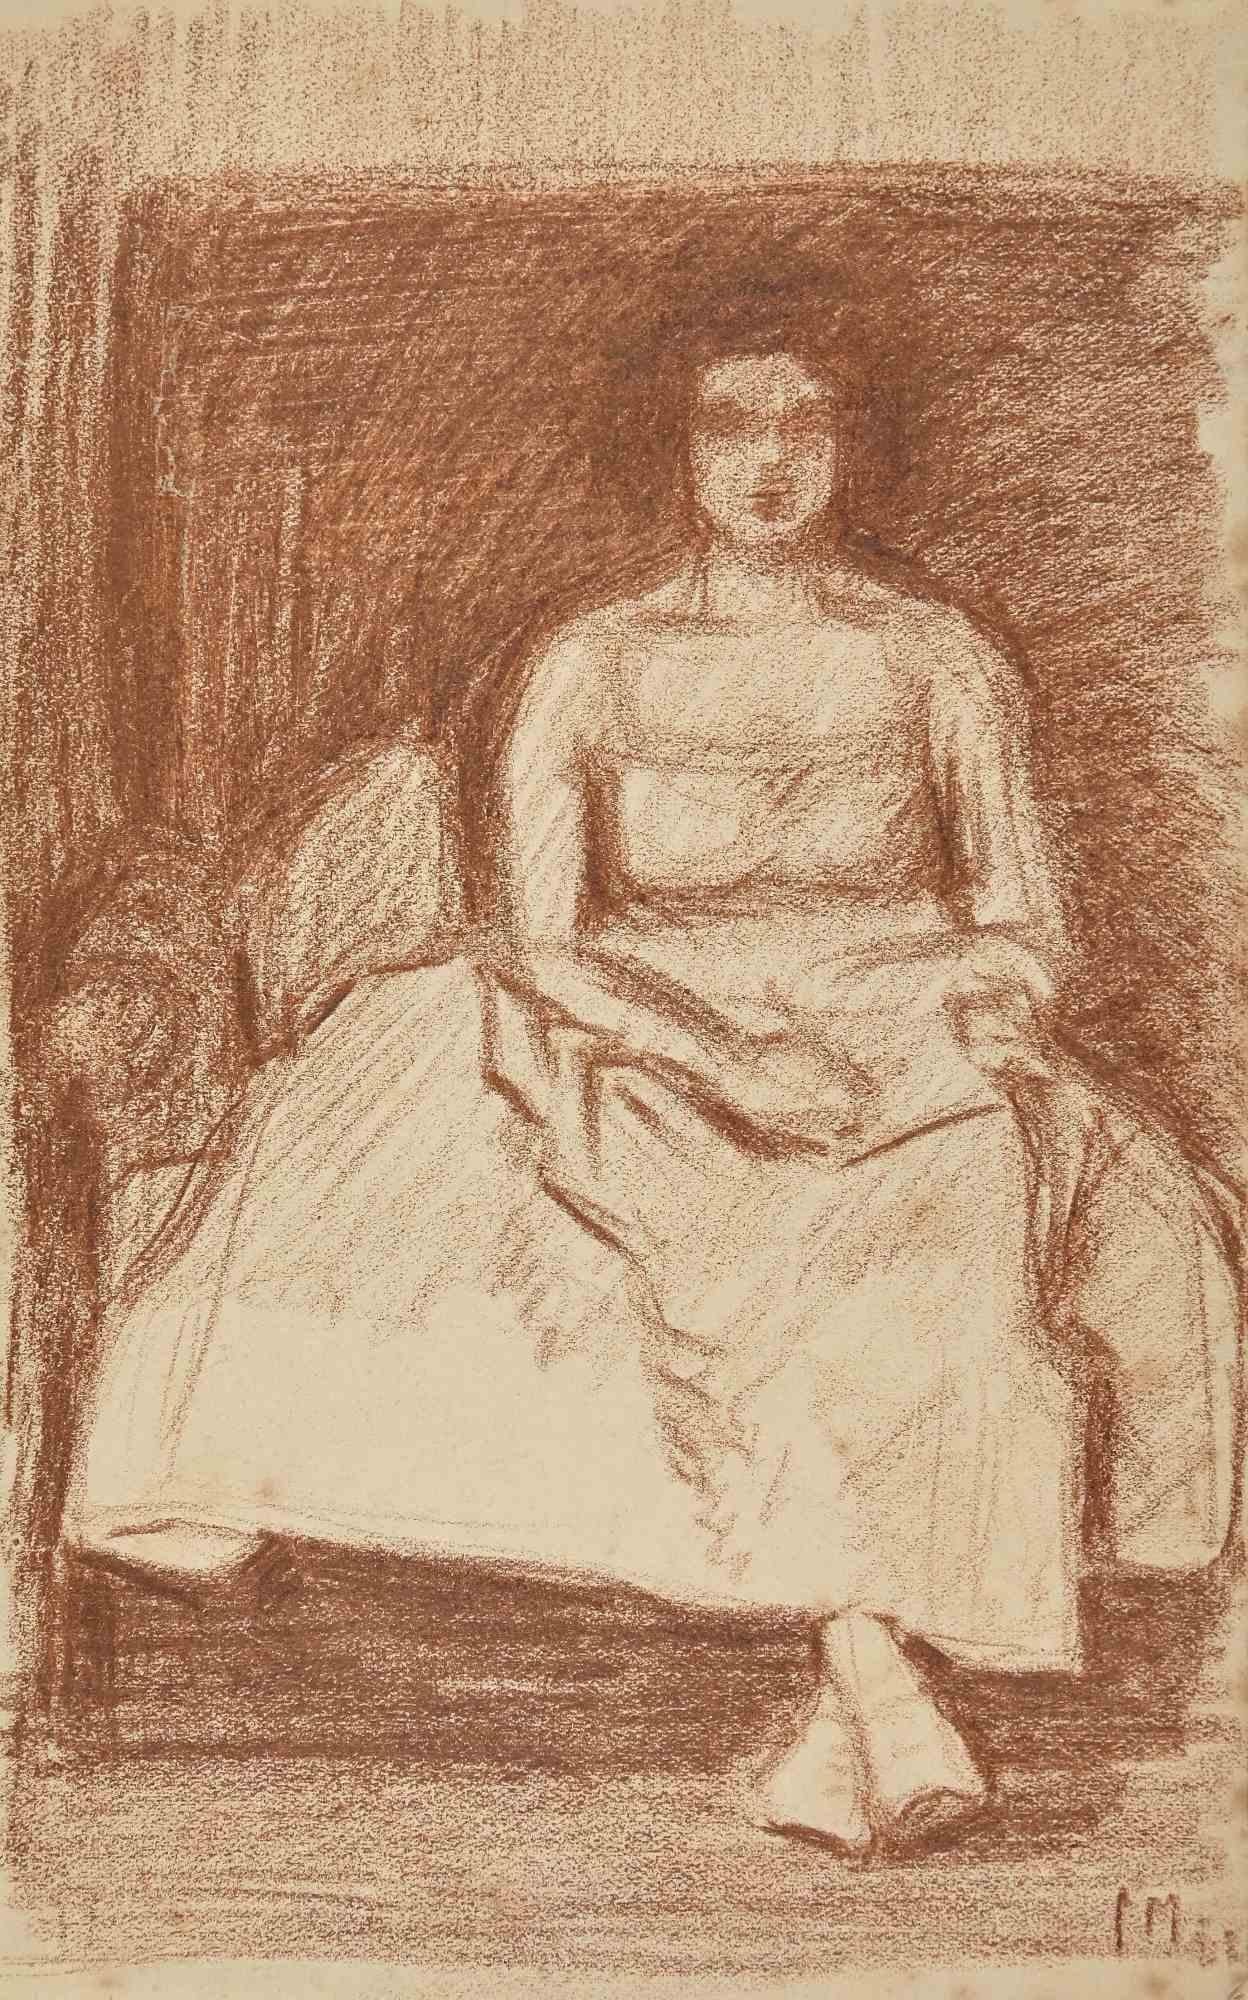 Unknown Figurative Art - The Seated Woman - Original Drawing - Early 20th Century